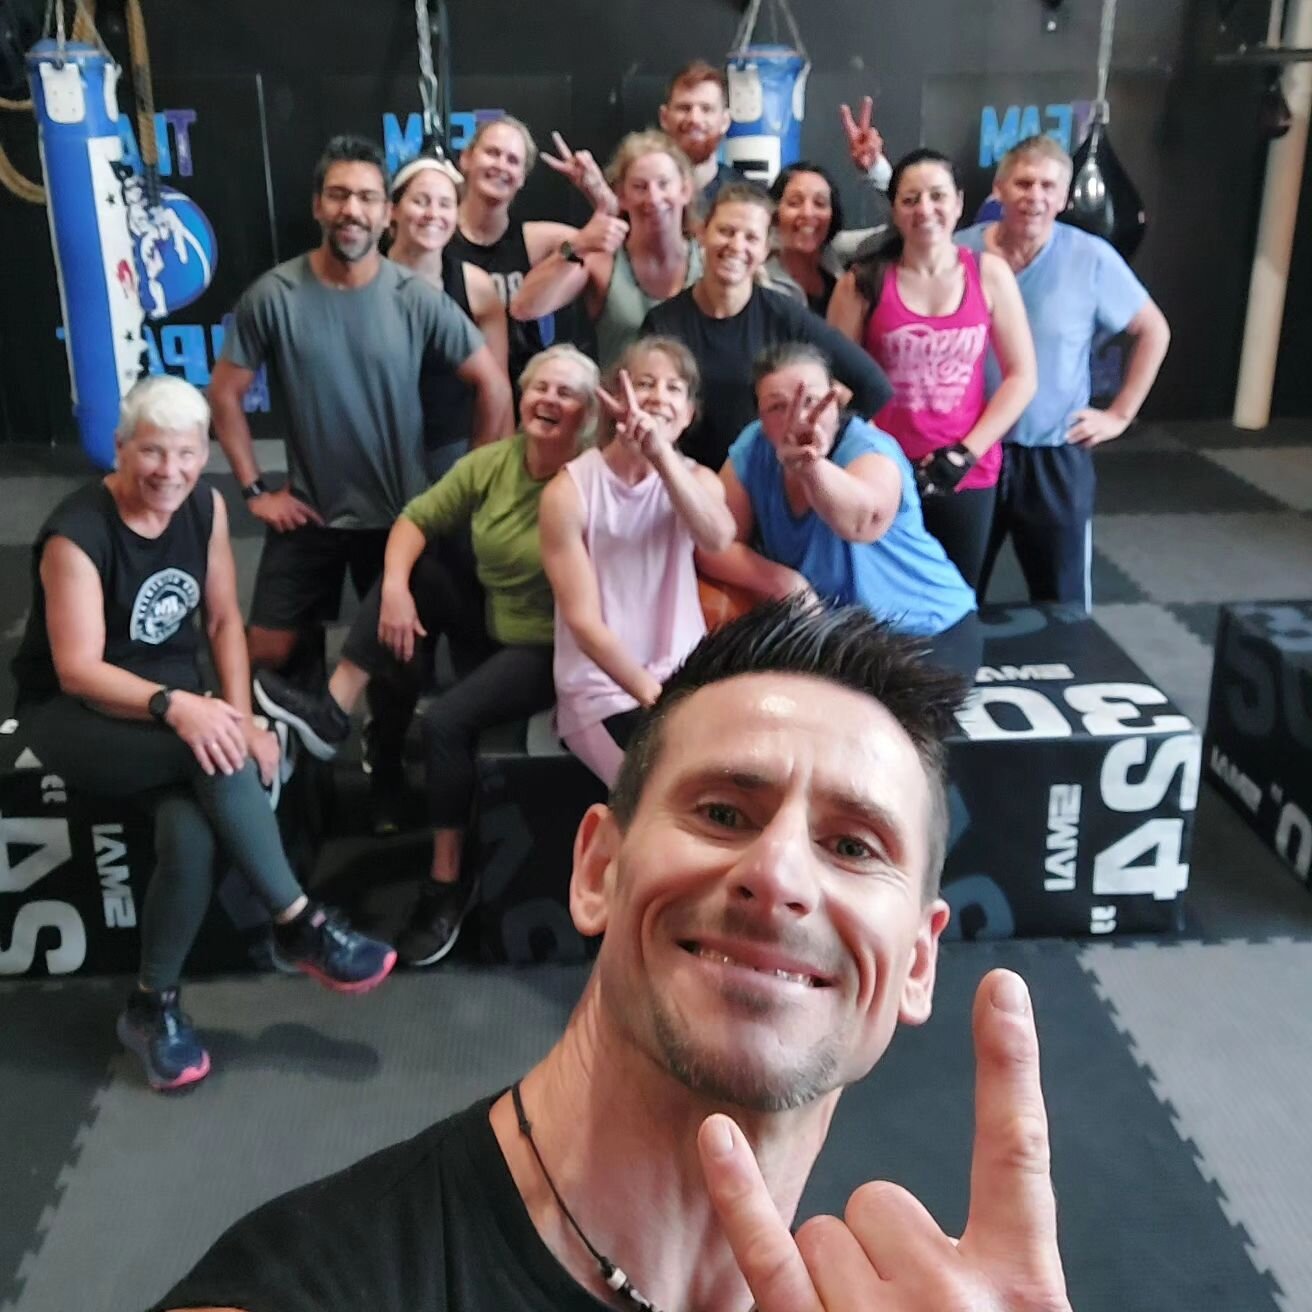 CRACKER of a Strength class this morning with coach Tom 💪🏼

I had the pleasure of jumping in for a session with our Supafit fam and what a blast, so much fun, shit talk and good old fashioned hard work 🤜🏼🤛🏼

Thanks Team, love your work 😎

Coac